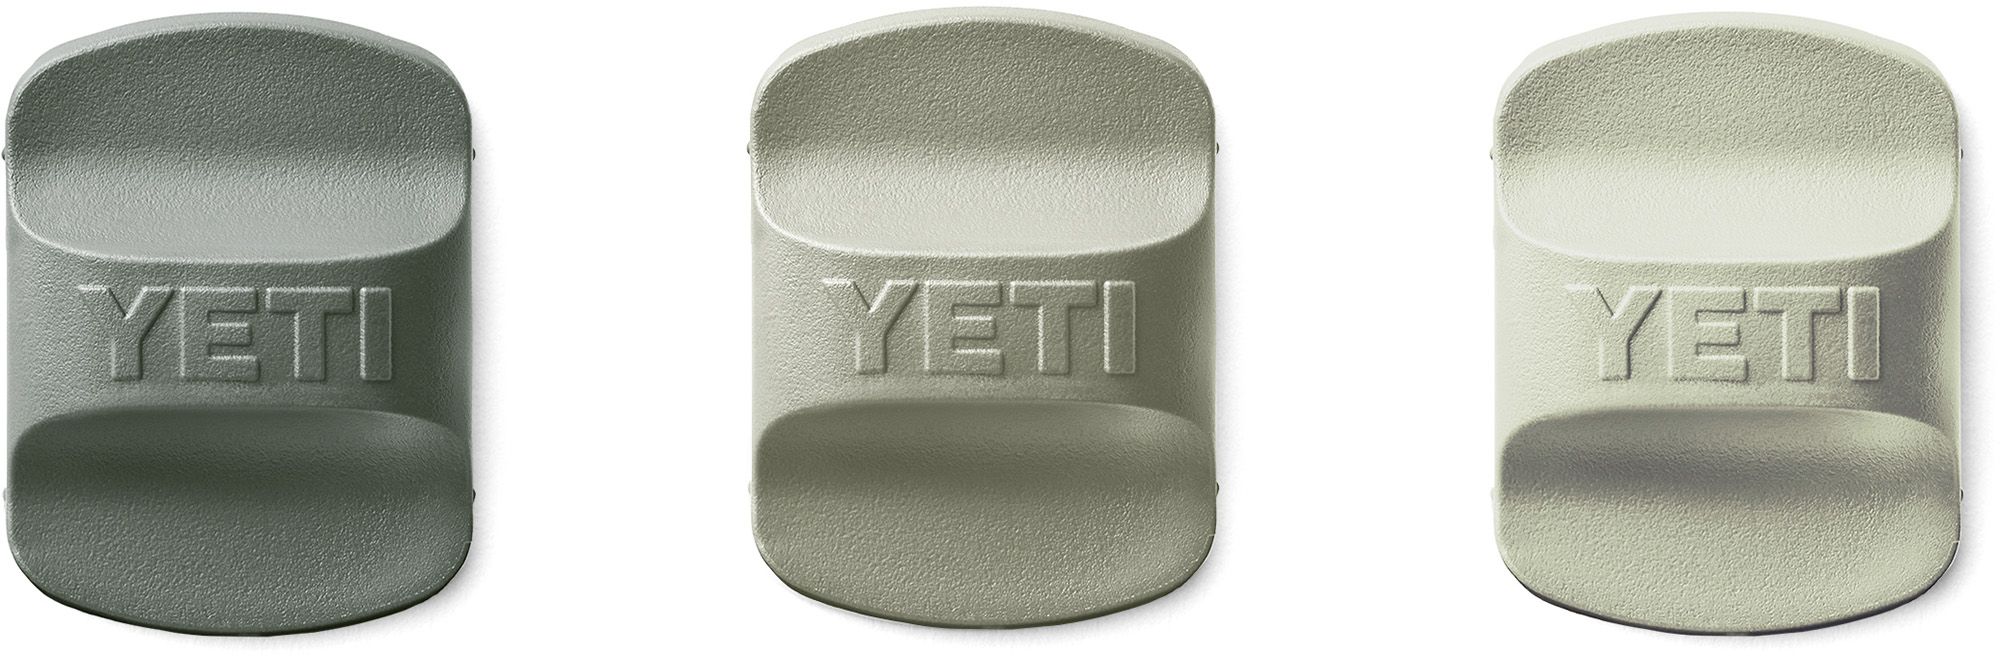 YETI 21071502026 RAMBLER® 18 OZ WATER BOTTLE WITH COLOR-MATCHED